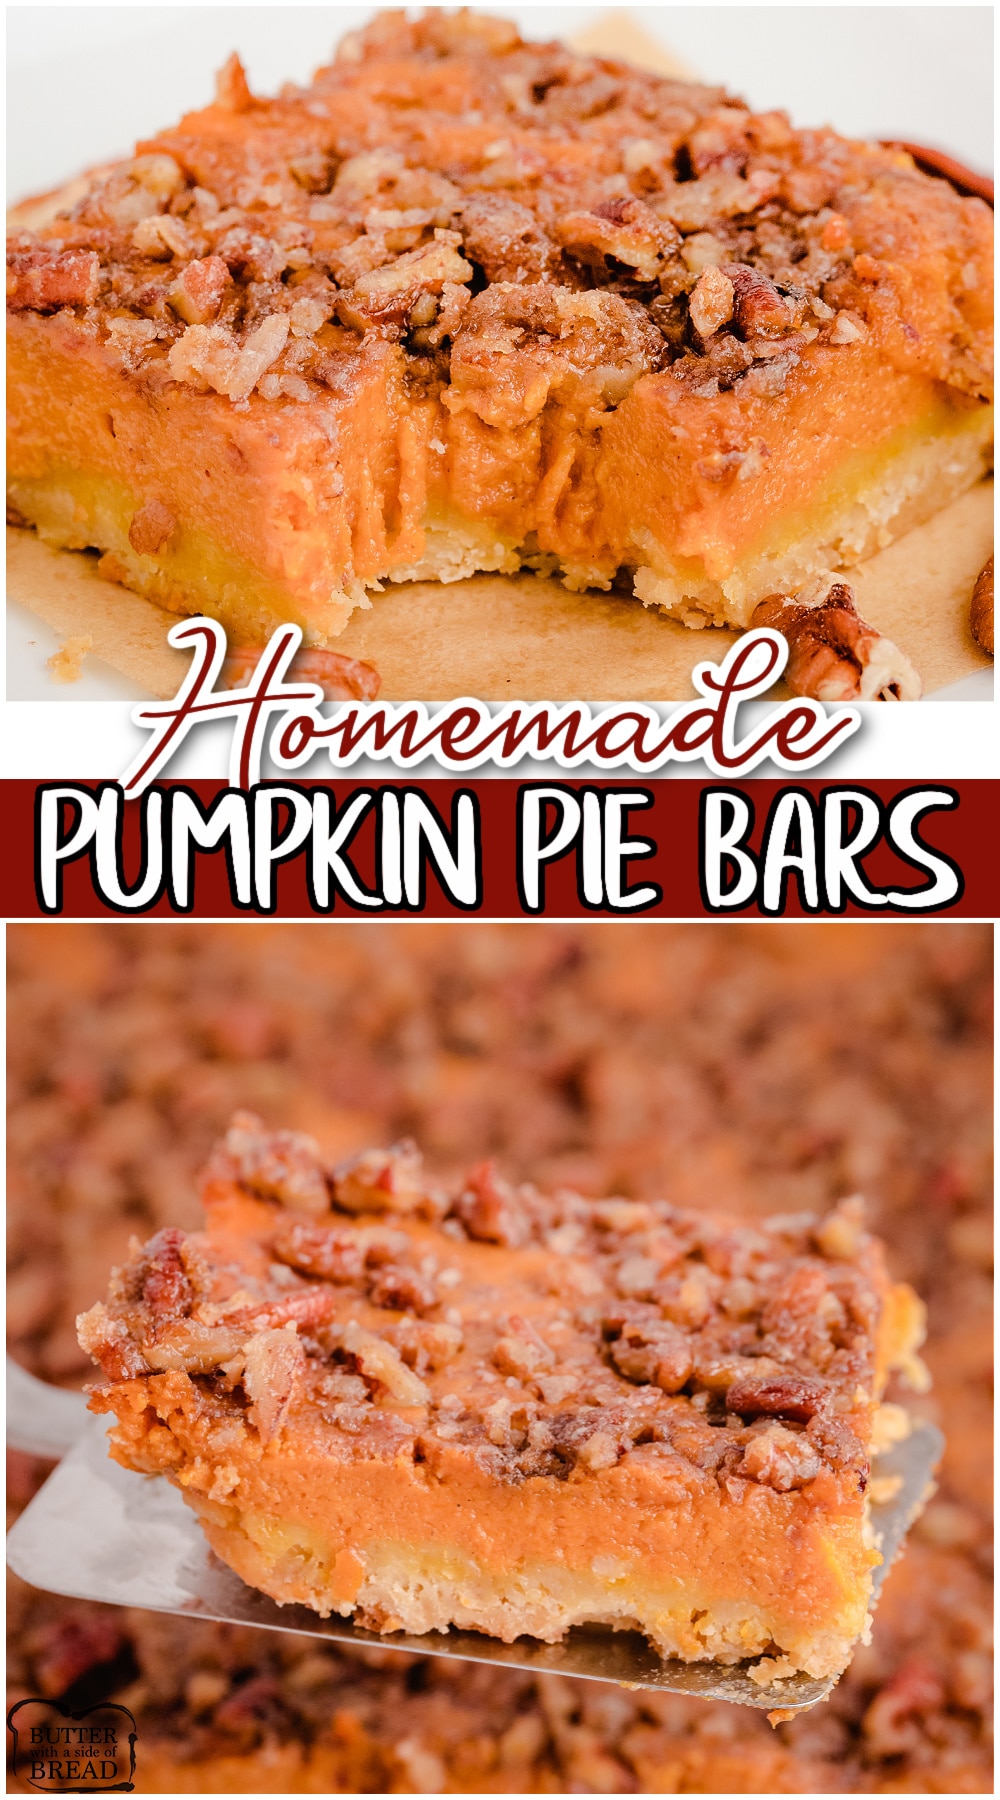 Pumpkin Pie Bars made with a buttery oat crust & topped with traditional pumpkin pie filling with crunchy, sweet pecans. All the flavors you love from pumpkin pie in an easy-to-make dessert bar recipe! 